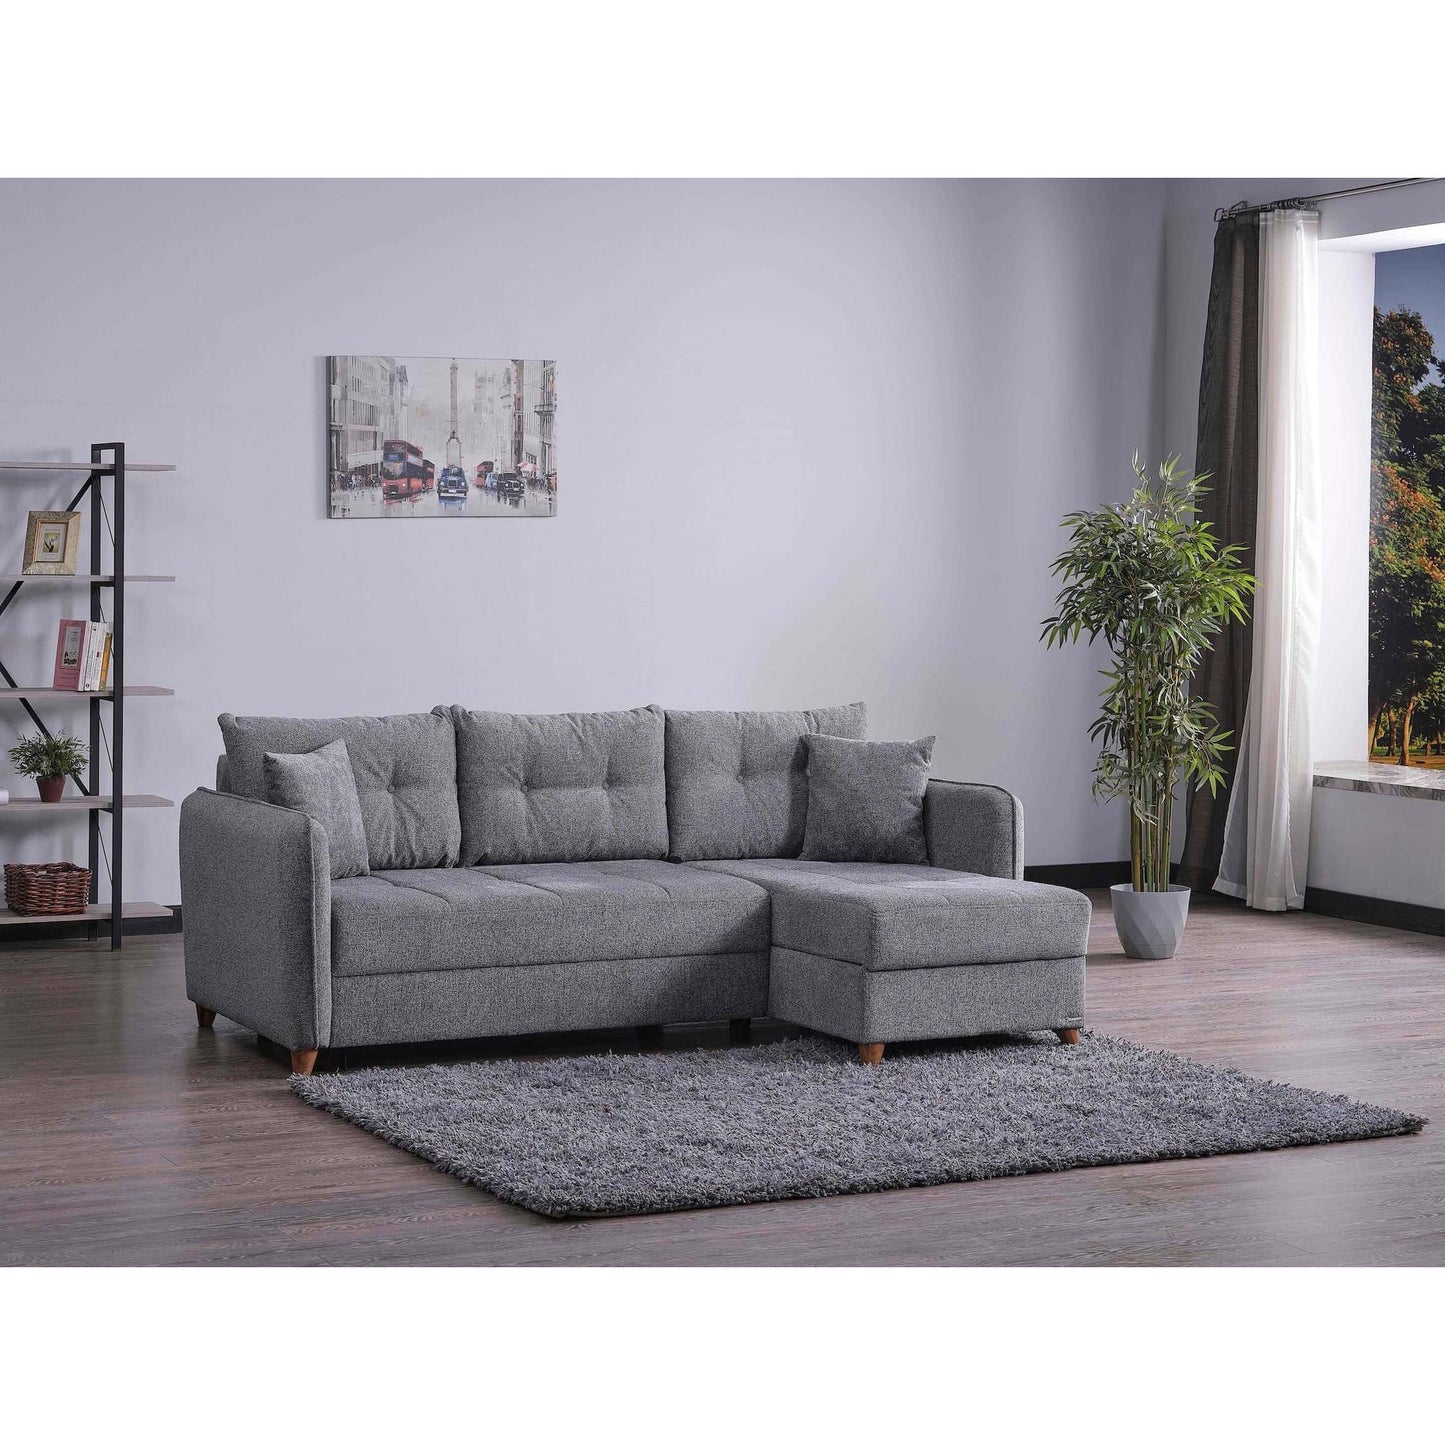 Brooklyn Sectional Sofa in Gray Chenille Fabric